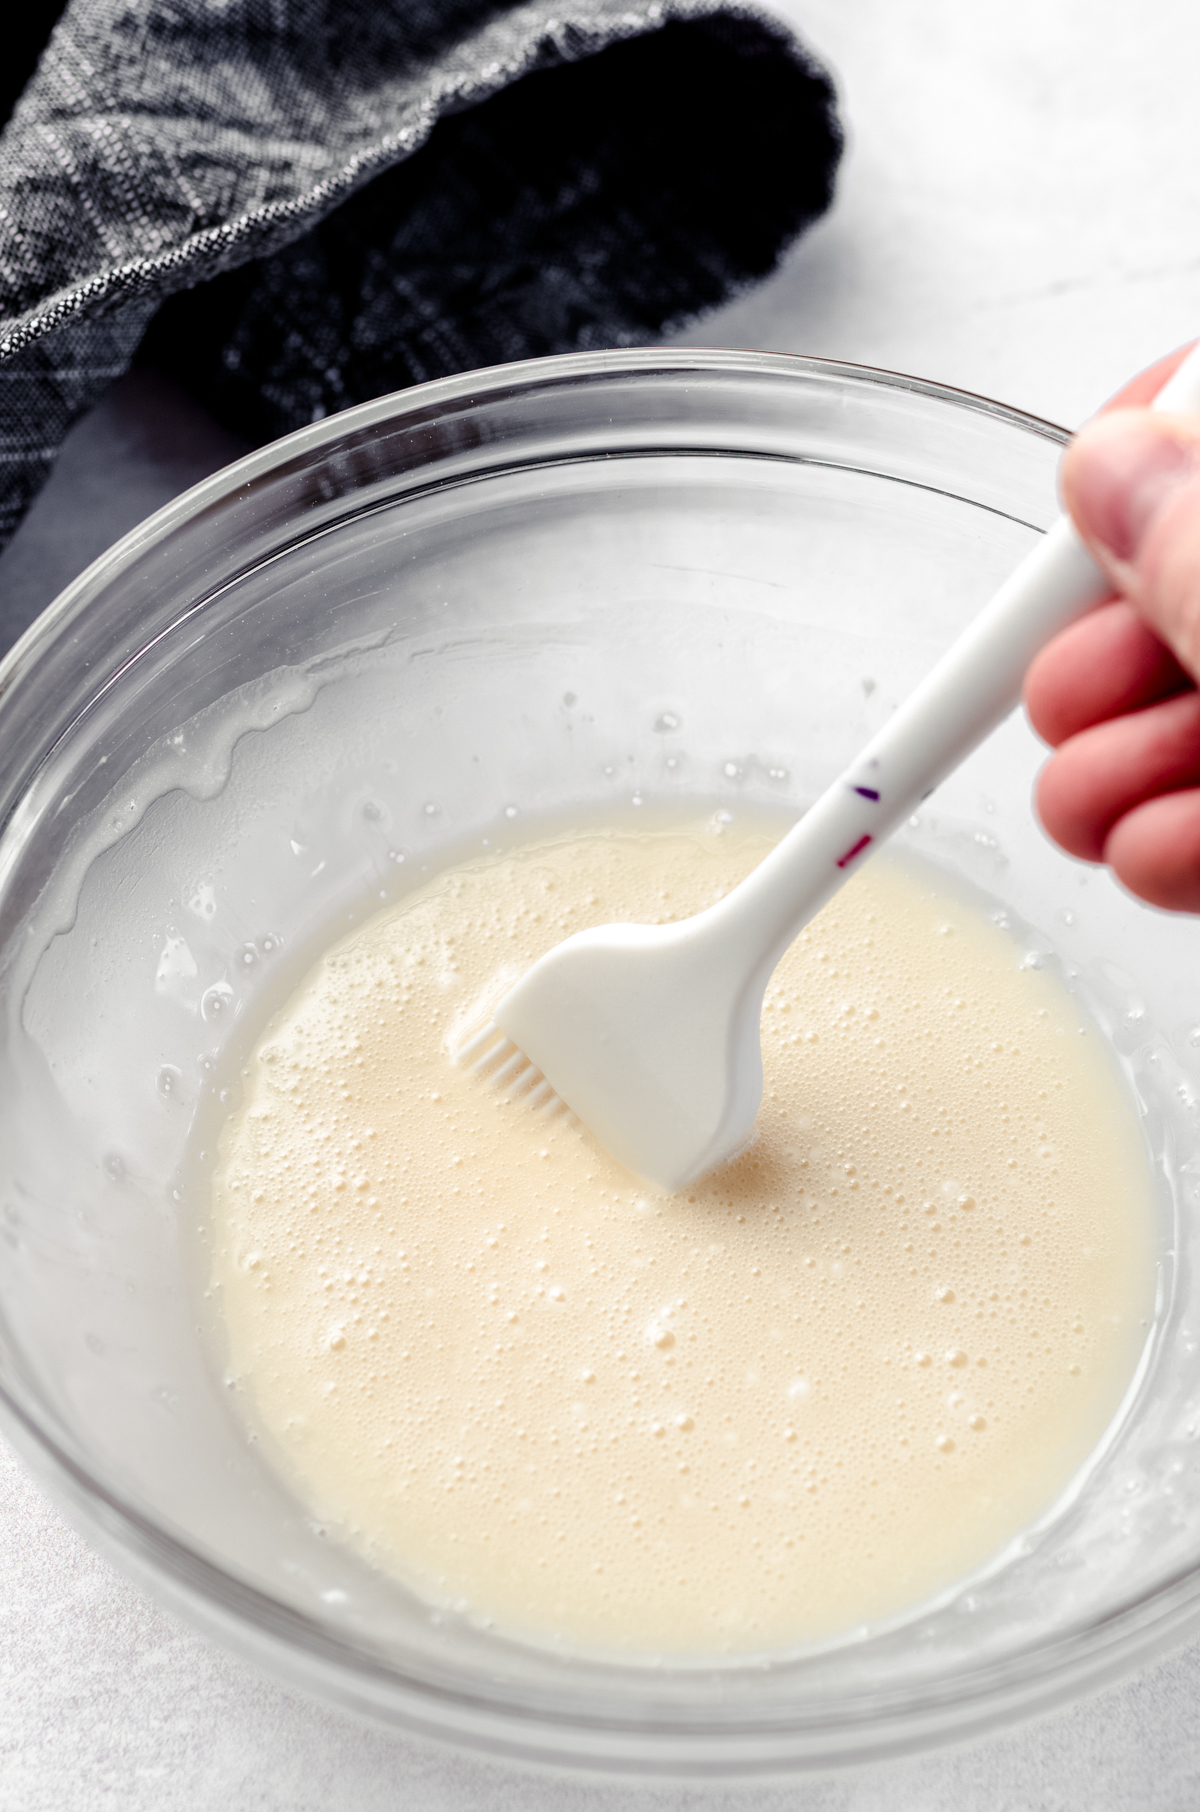 A hand holding a pastry brush in a bowl of vanilla glaze for hot cross buns.